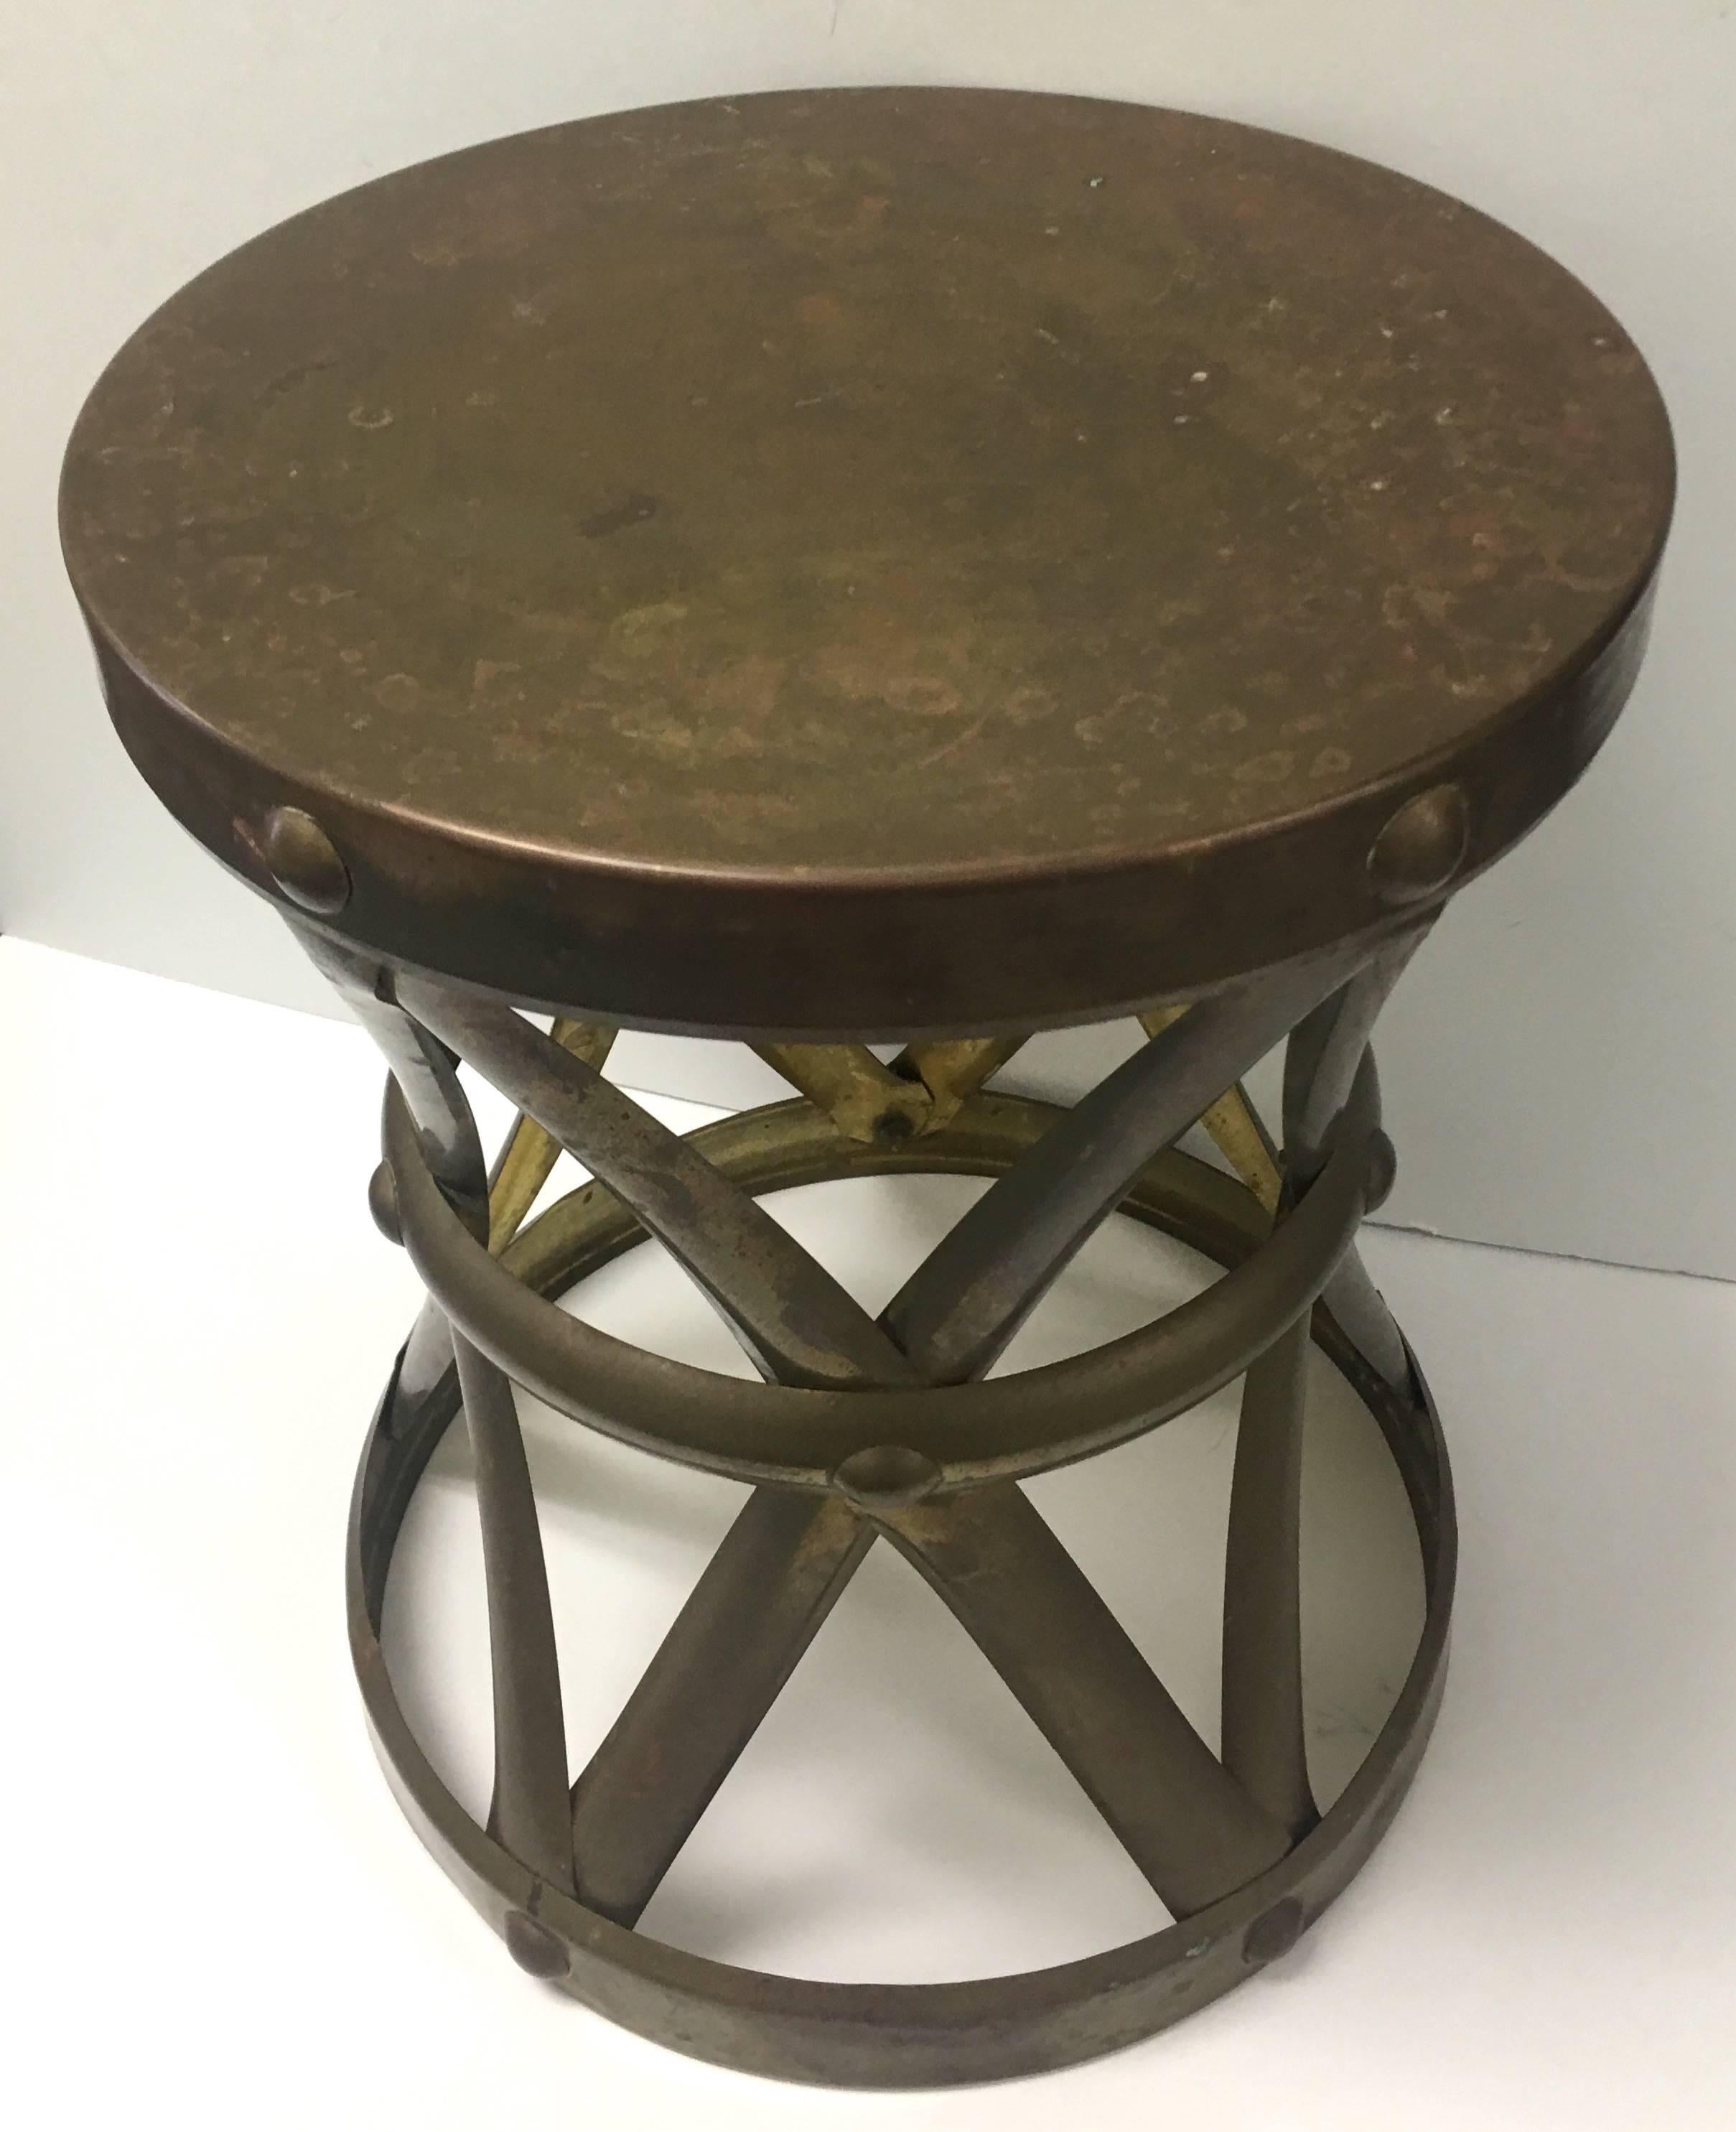 Brass X-base drum stool. Stamped 'Made in Hong Kong'. Overall unpolished as found patina.